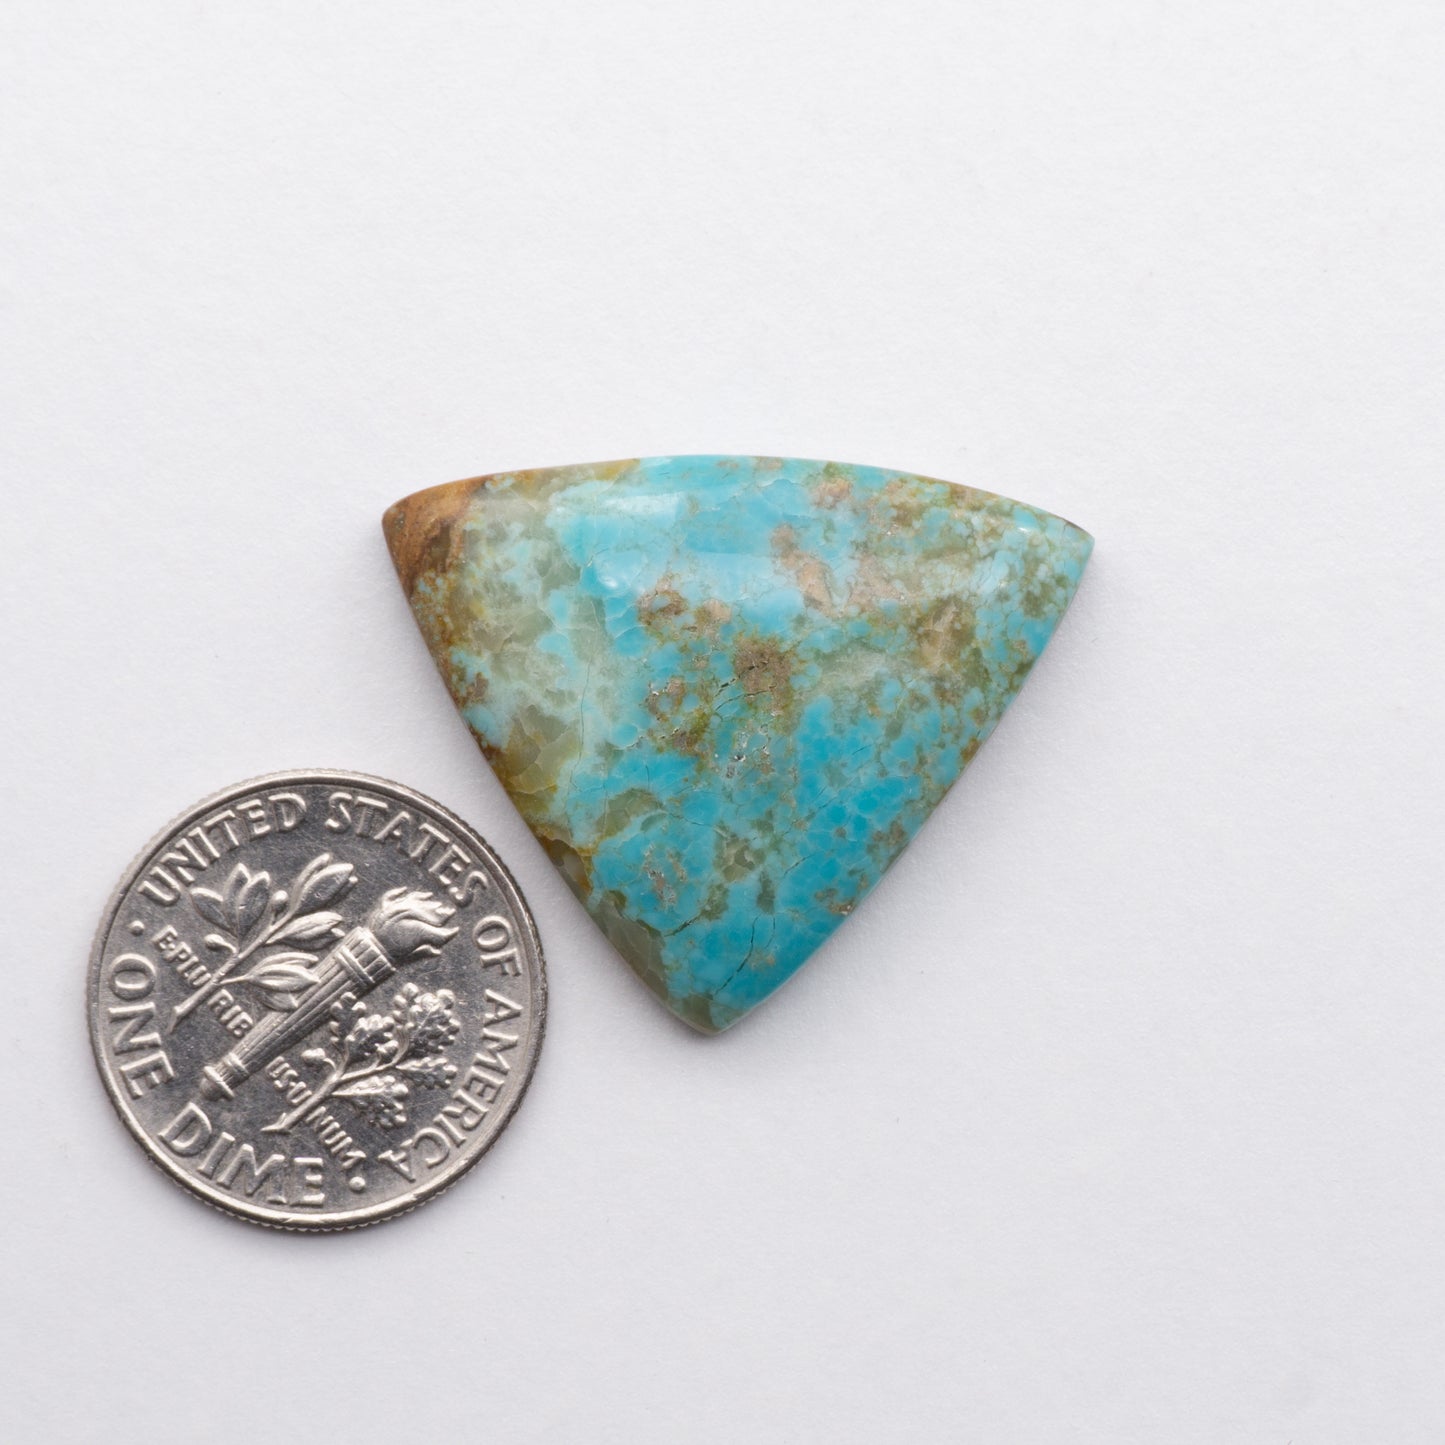 Number 8 Turquoise Cabochon 